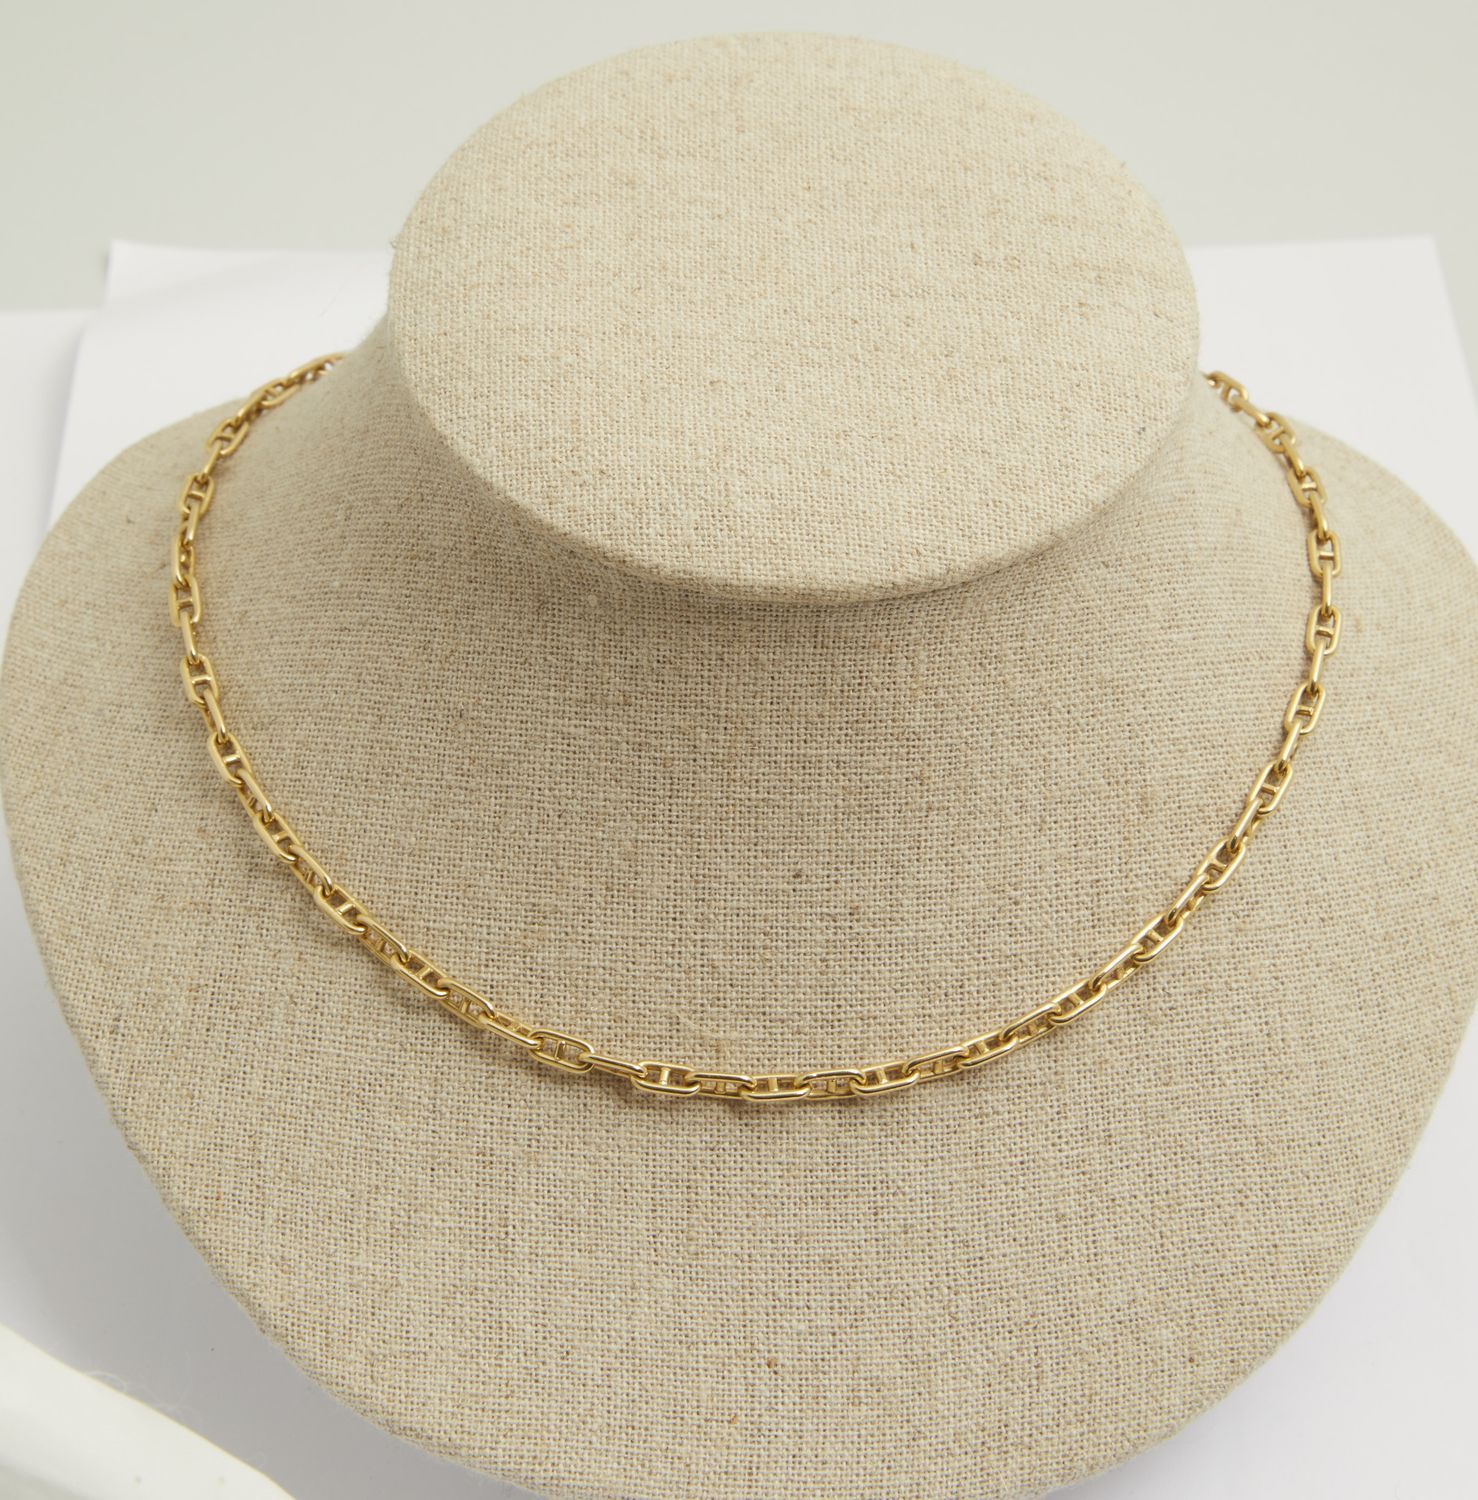 Null 80 Yellow gold marine mesh necklace


31.2g